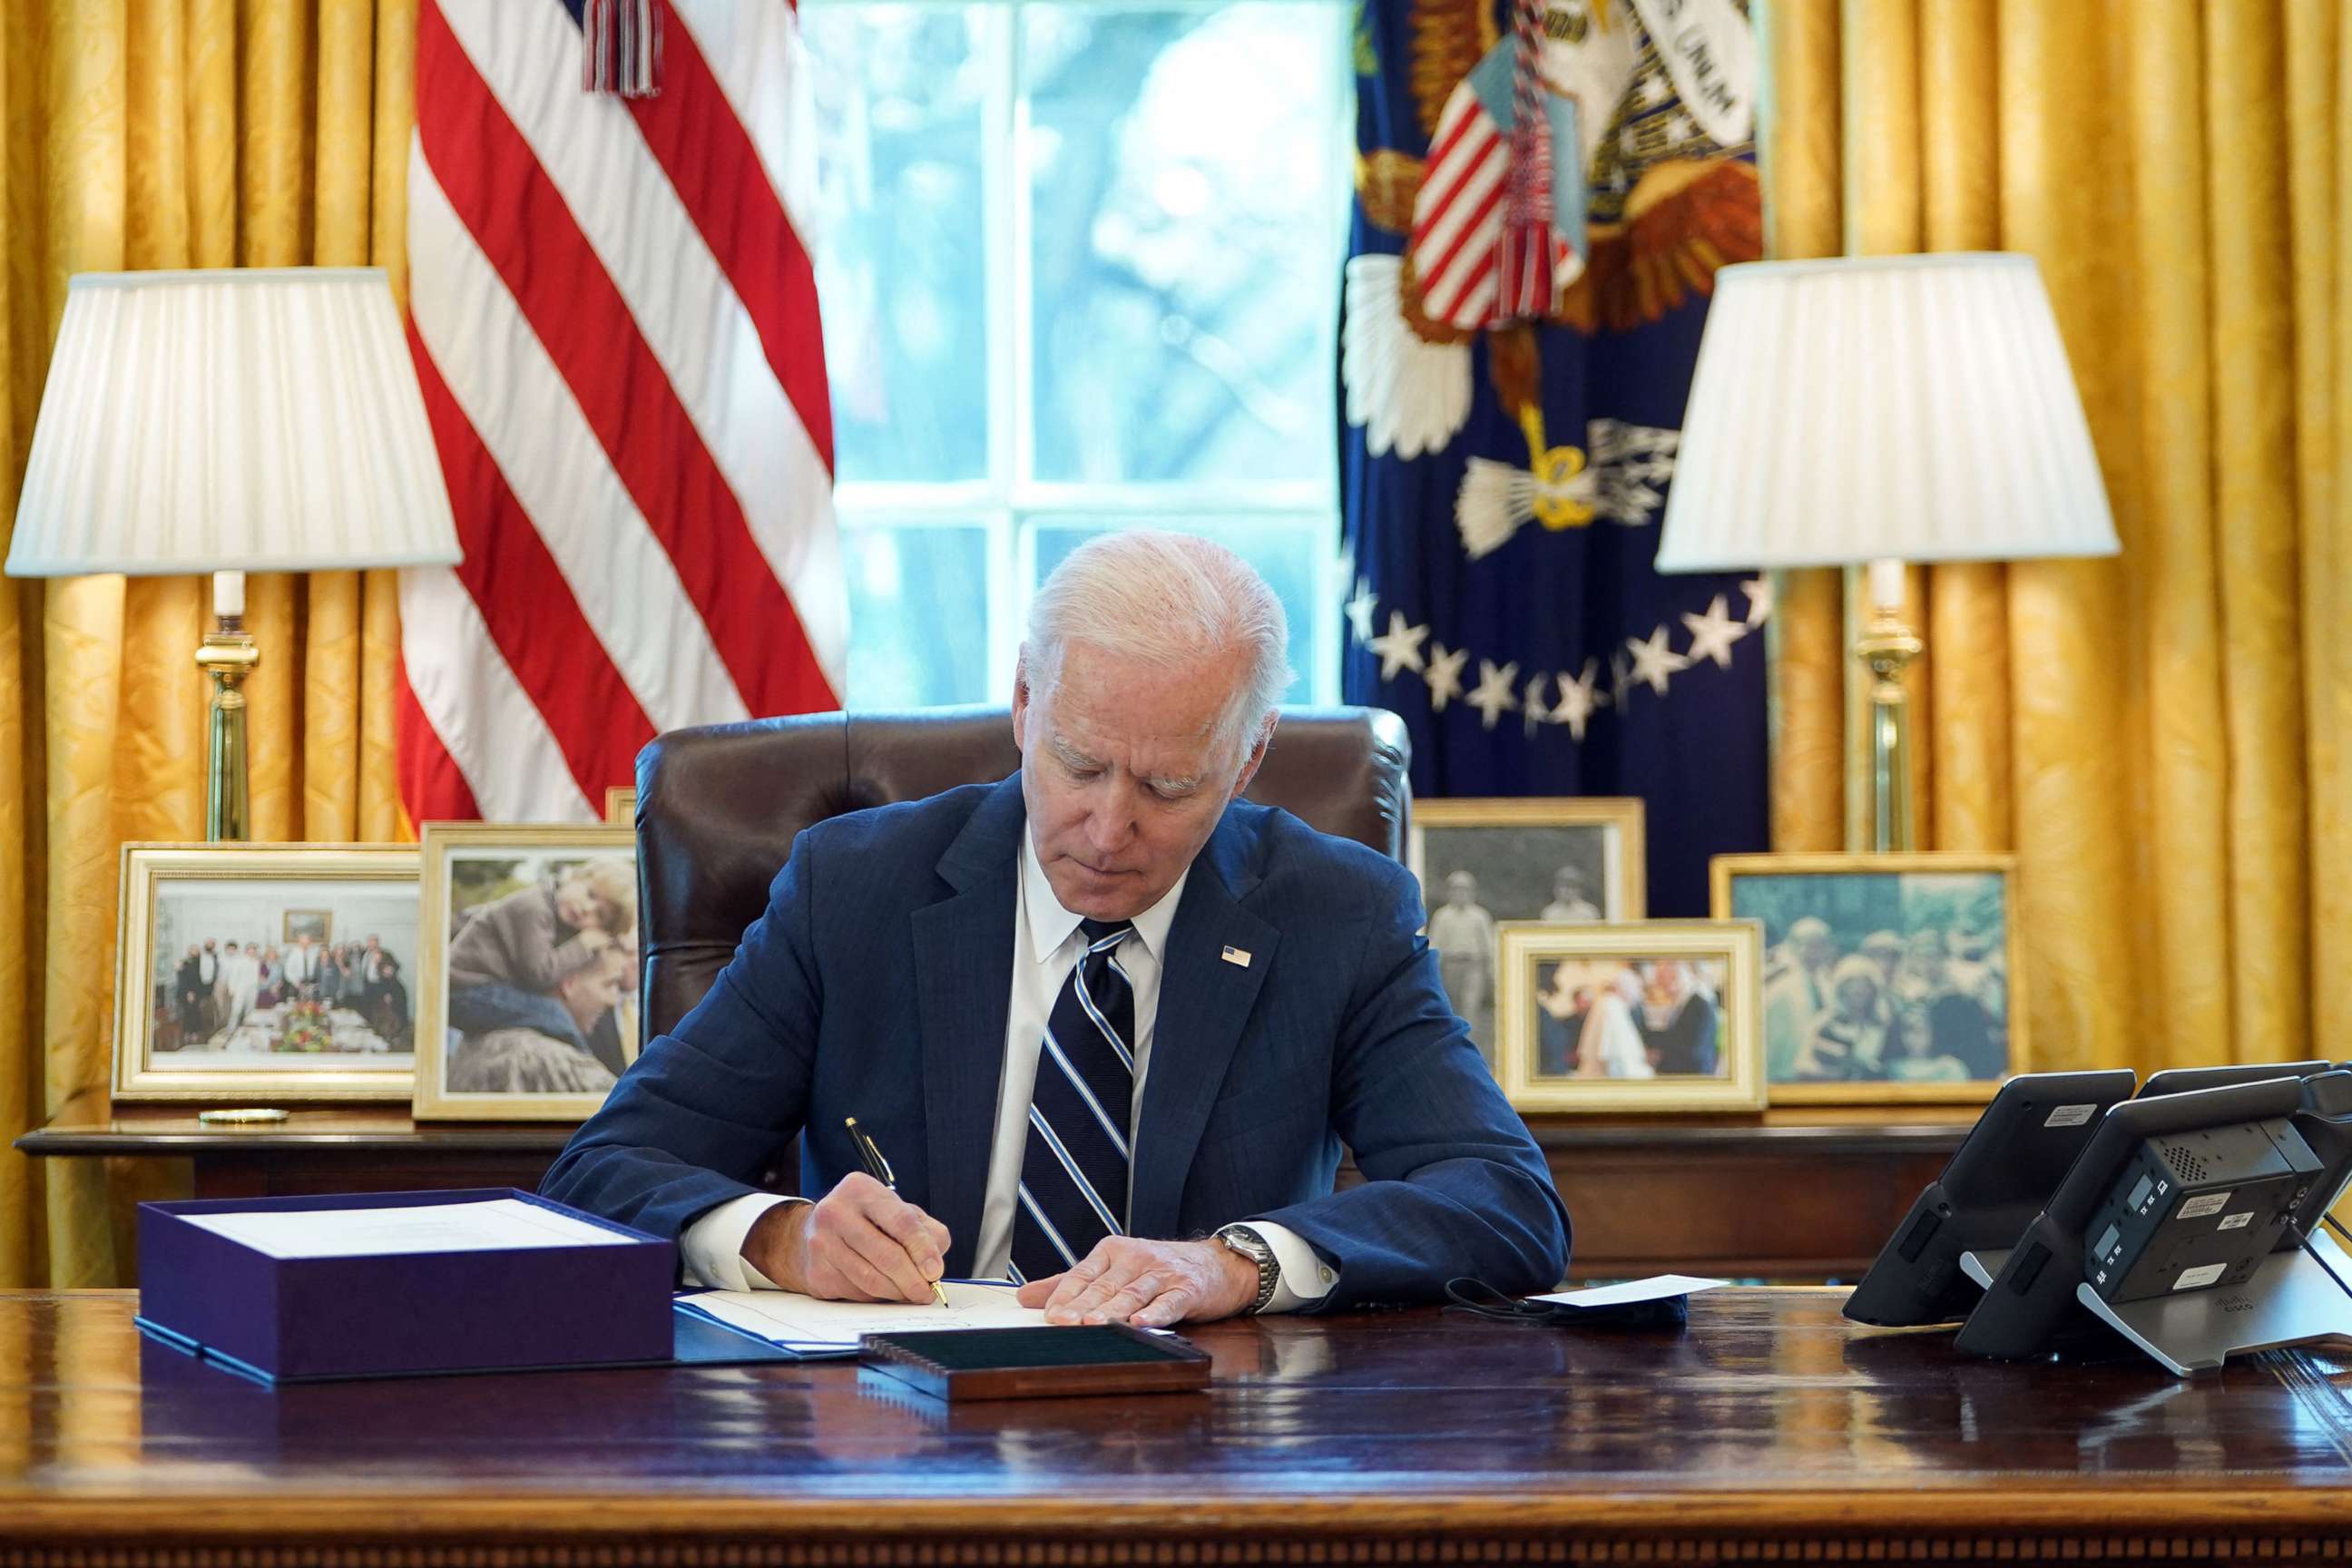 PHOTO: President Joe Biden signs the American Rescue Plan on March 11, 2021, in the Oval Office of the White House in Washington, D.C.  